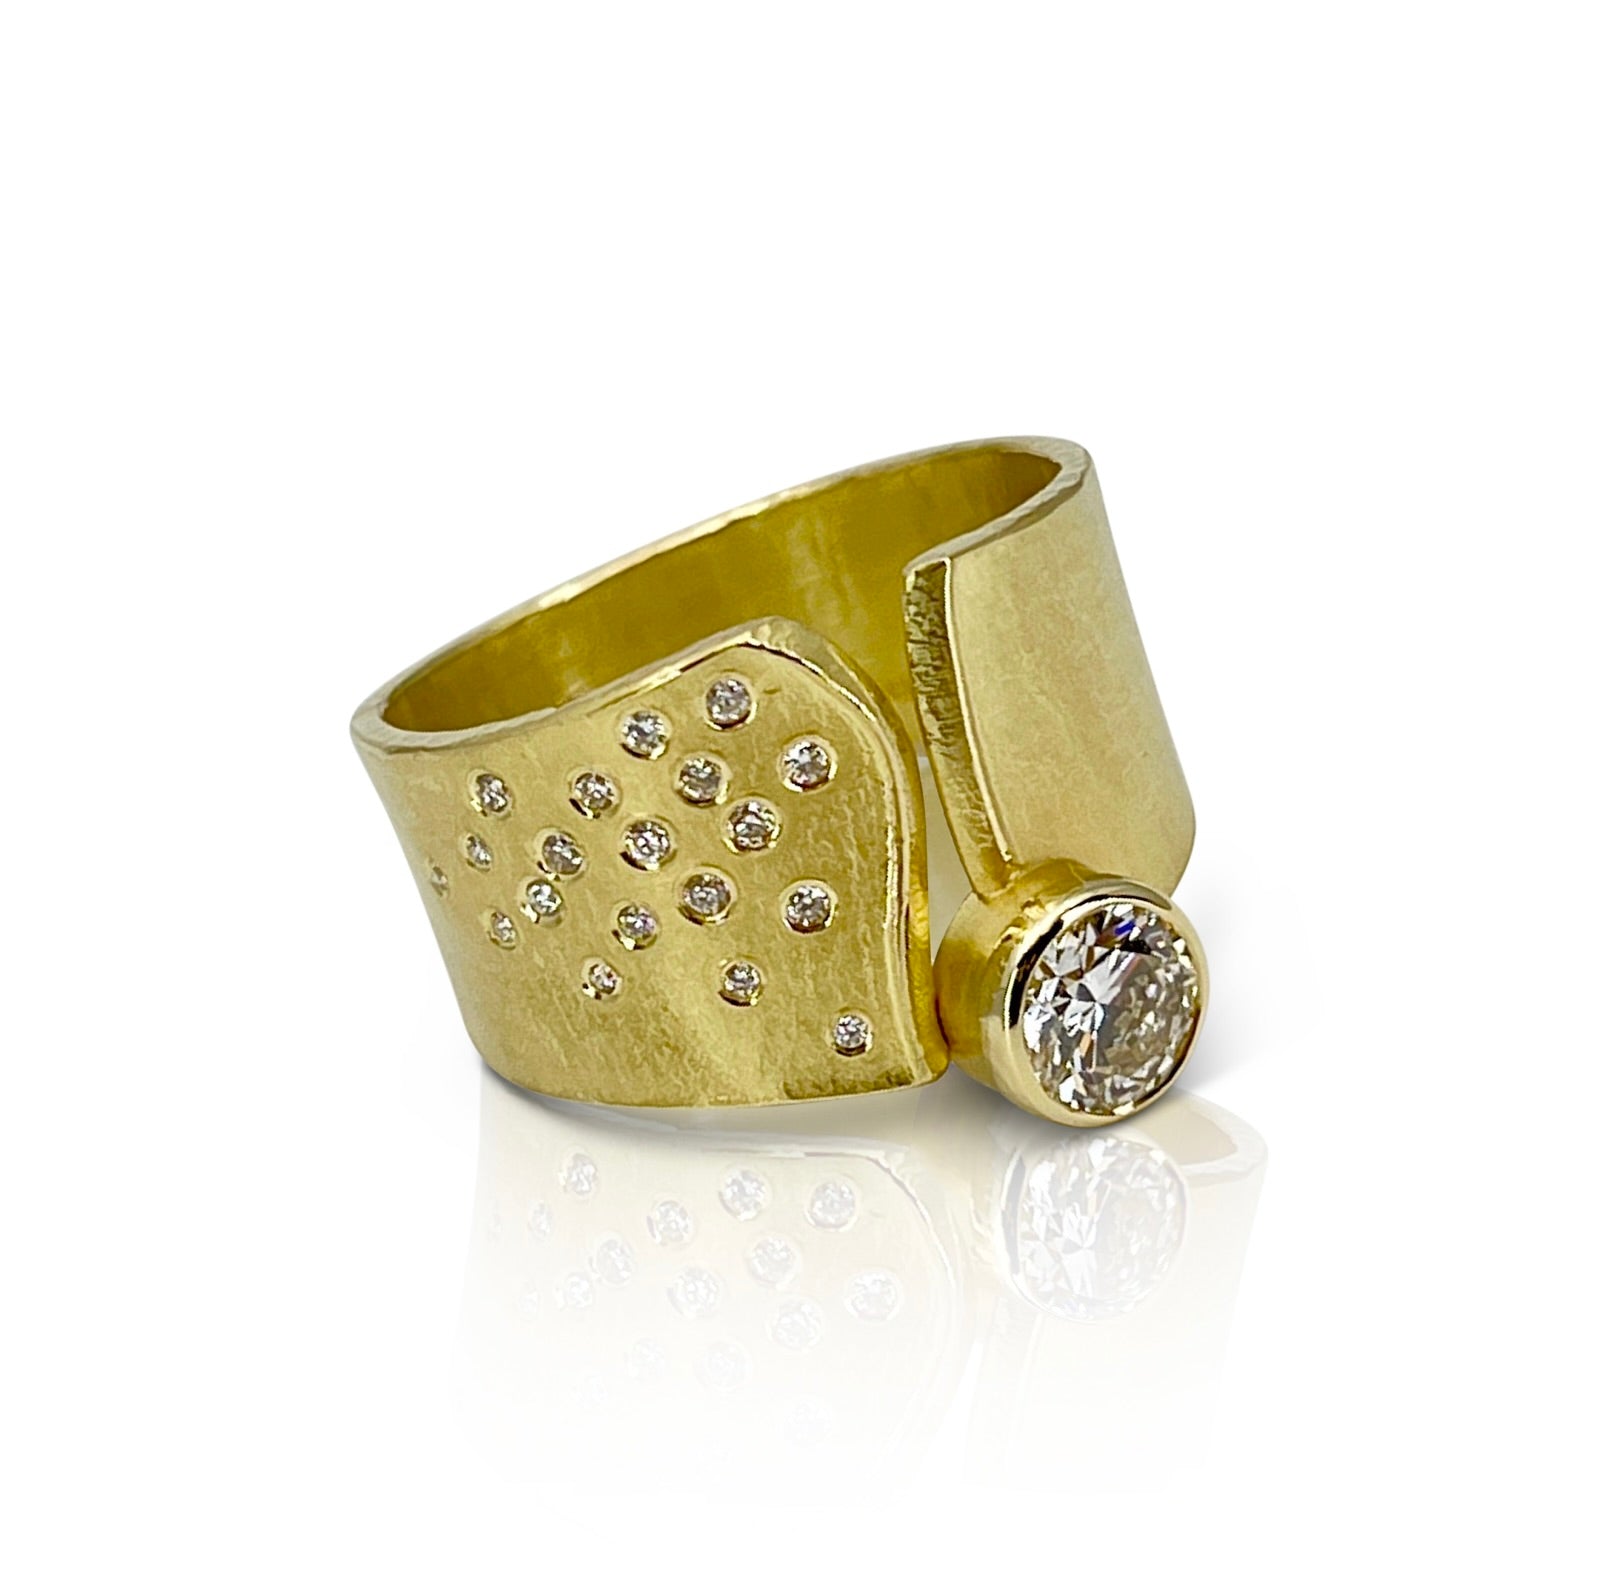 Wafer ring in 18K gold with center diamond and offset side diamonds